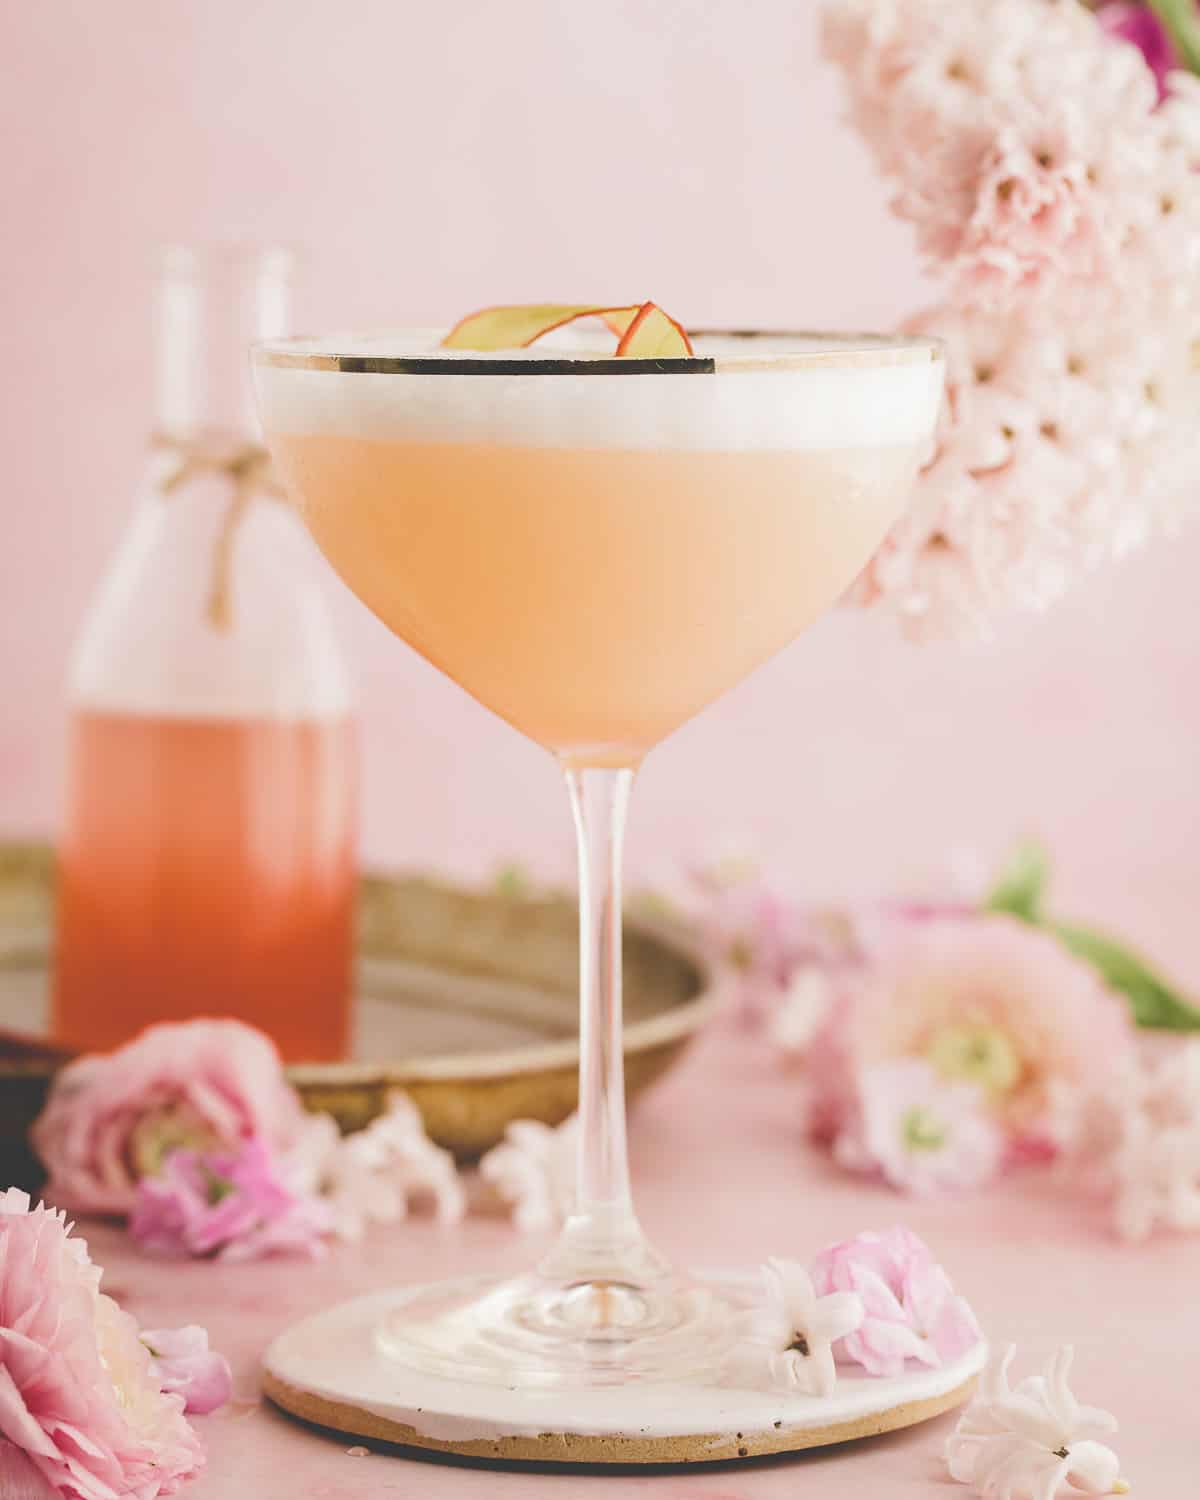 A vintage champagne glass with a silver rim filled with foamy rhubarb gin sour, on a pink surface surrounded by flowers and a bottle of rhubarb syrup. 